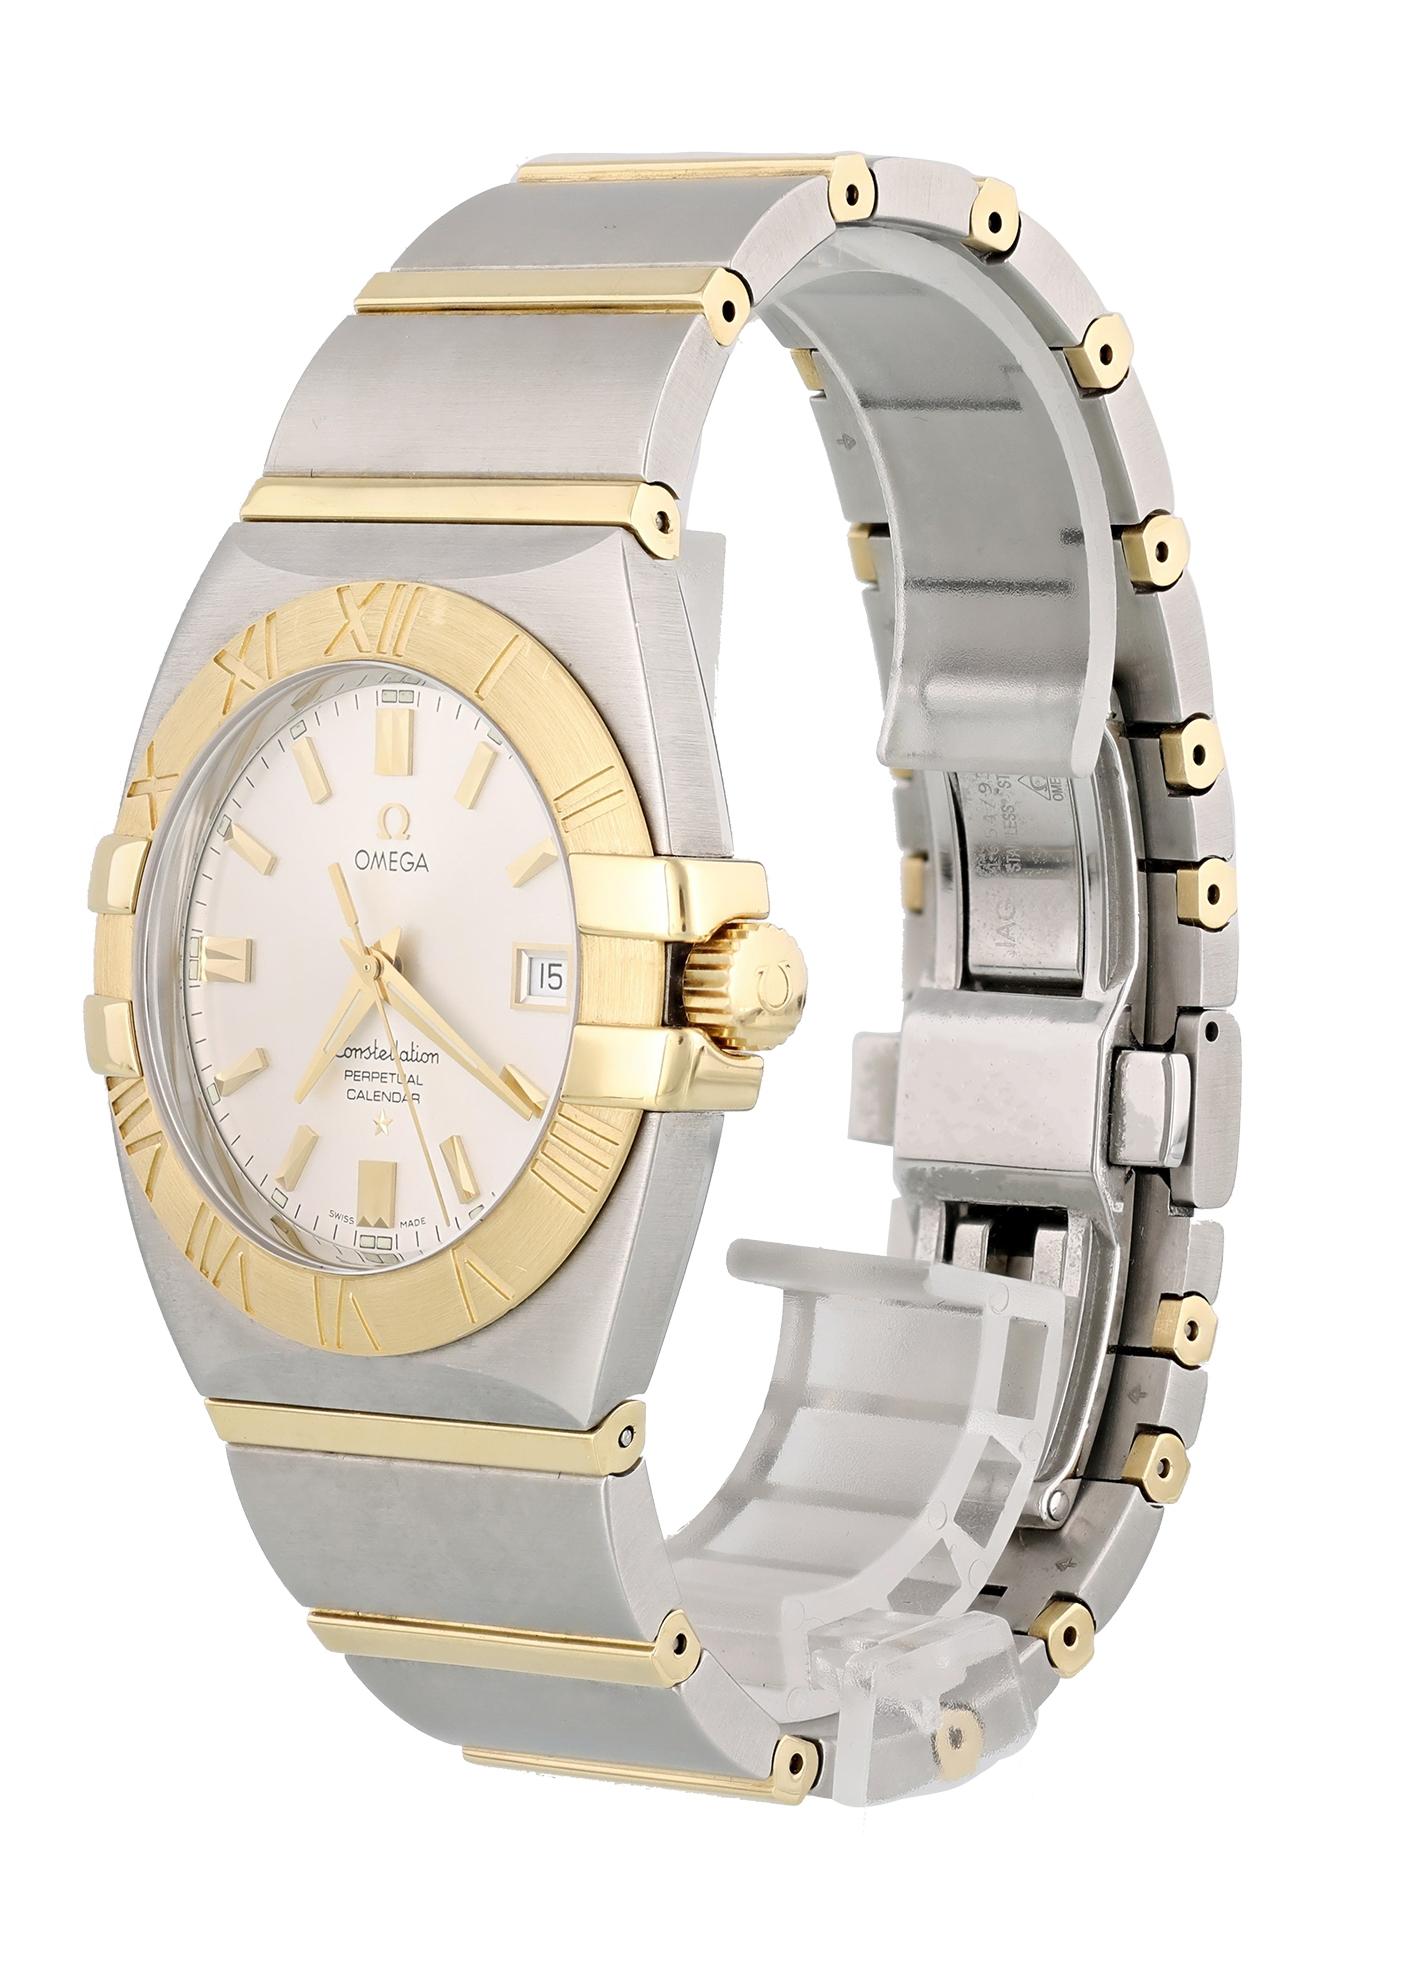 Omega Constellation Double Eagle 1213.30.00 Mens Watch. 
38mm Stainless Steel case. 
Stainless Steel Stationary bezel. 
Silver dial with Luminous gold hands and index hour markers. 
Minute markers on the outer dial. 
Perpetual calendar date display